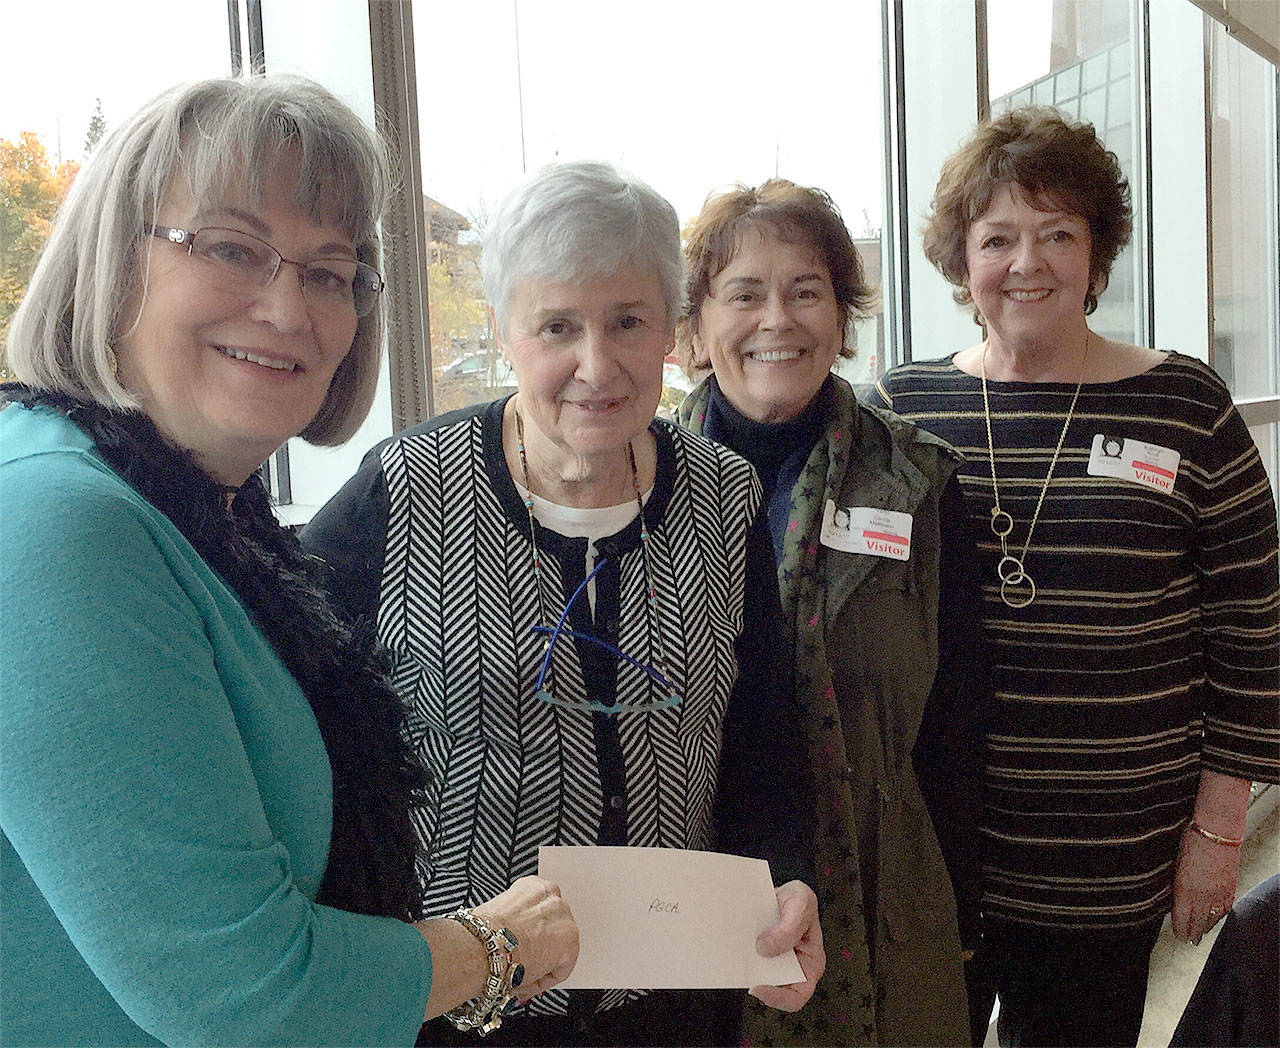 At the October board meeting, Providence General Children’s Association President Mary Lou Finley accepted a $2,000 donation from PGCA Guild 1 represented by Pat Ostolaza, Carole Matteson and Kathy Krull. (Contributed photo)